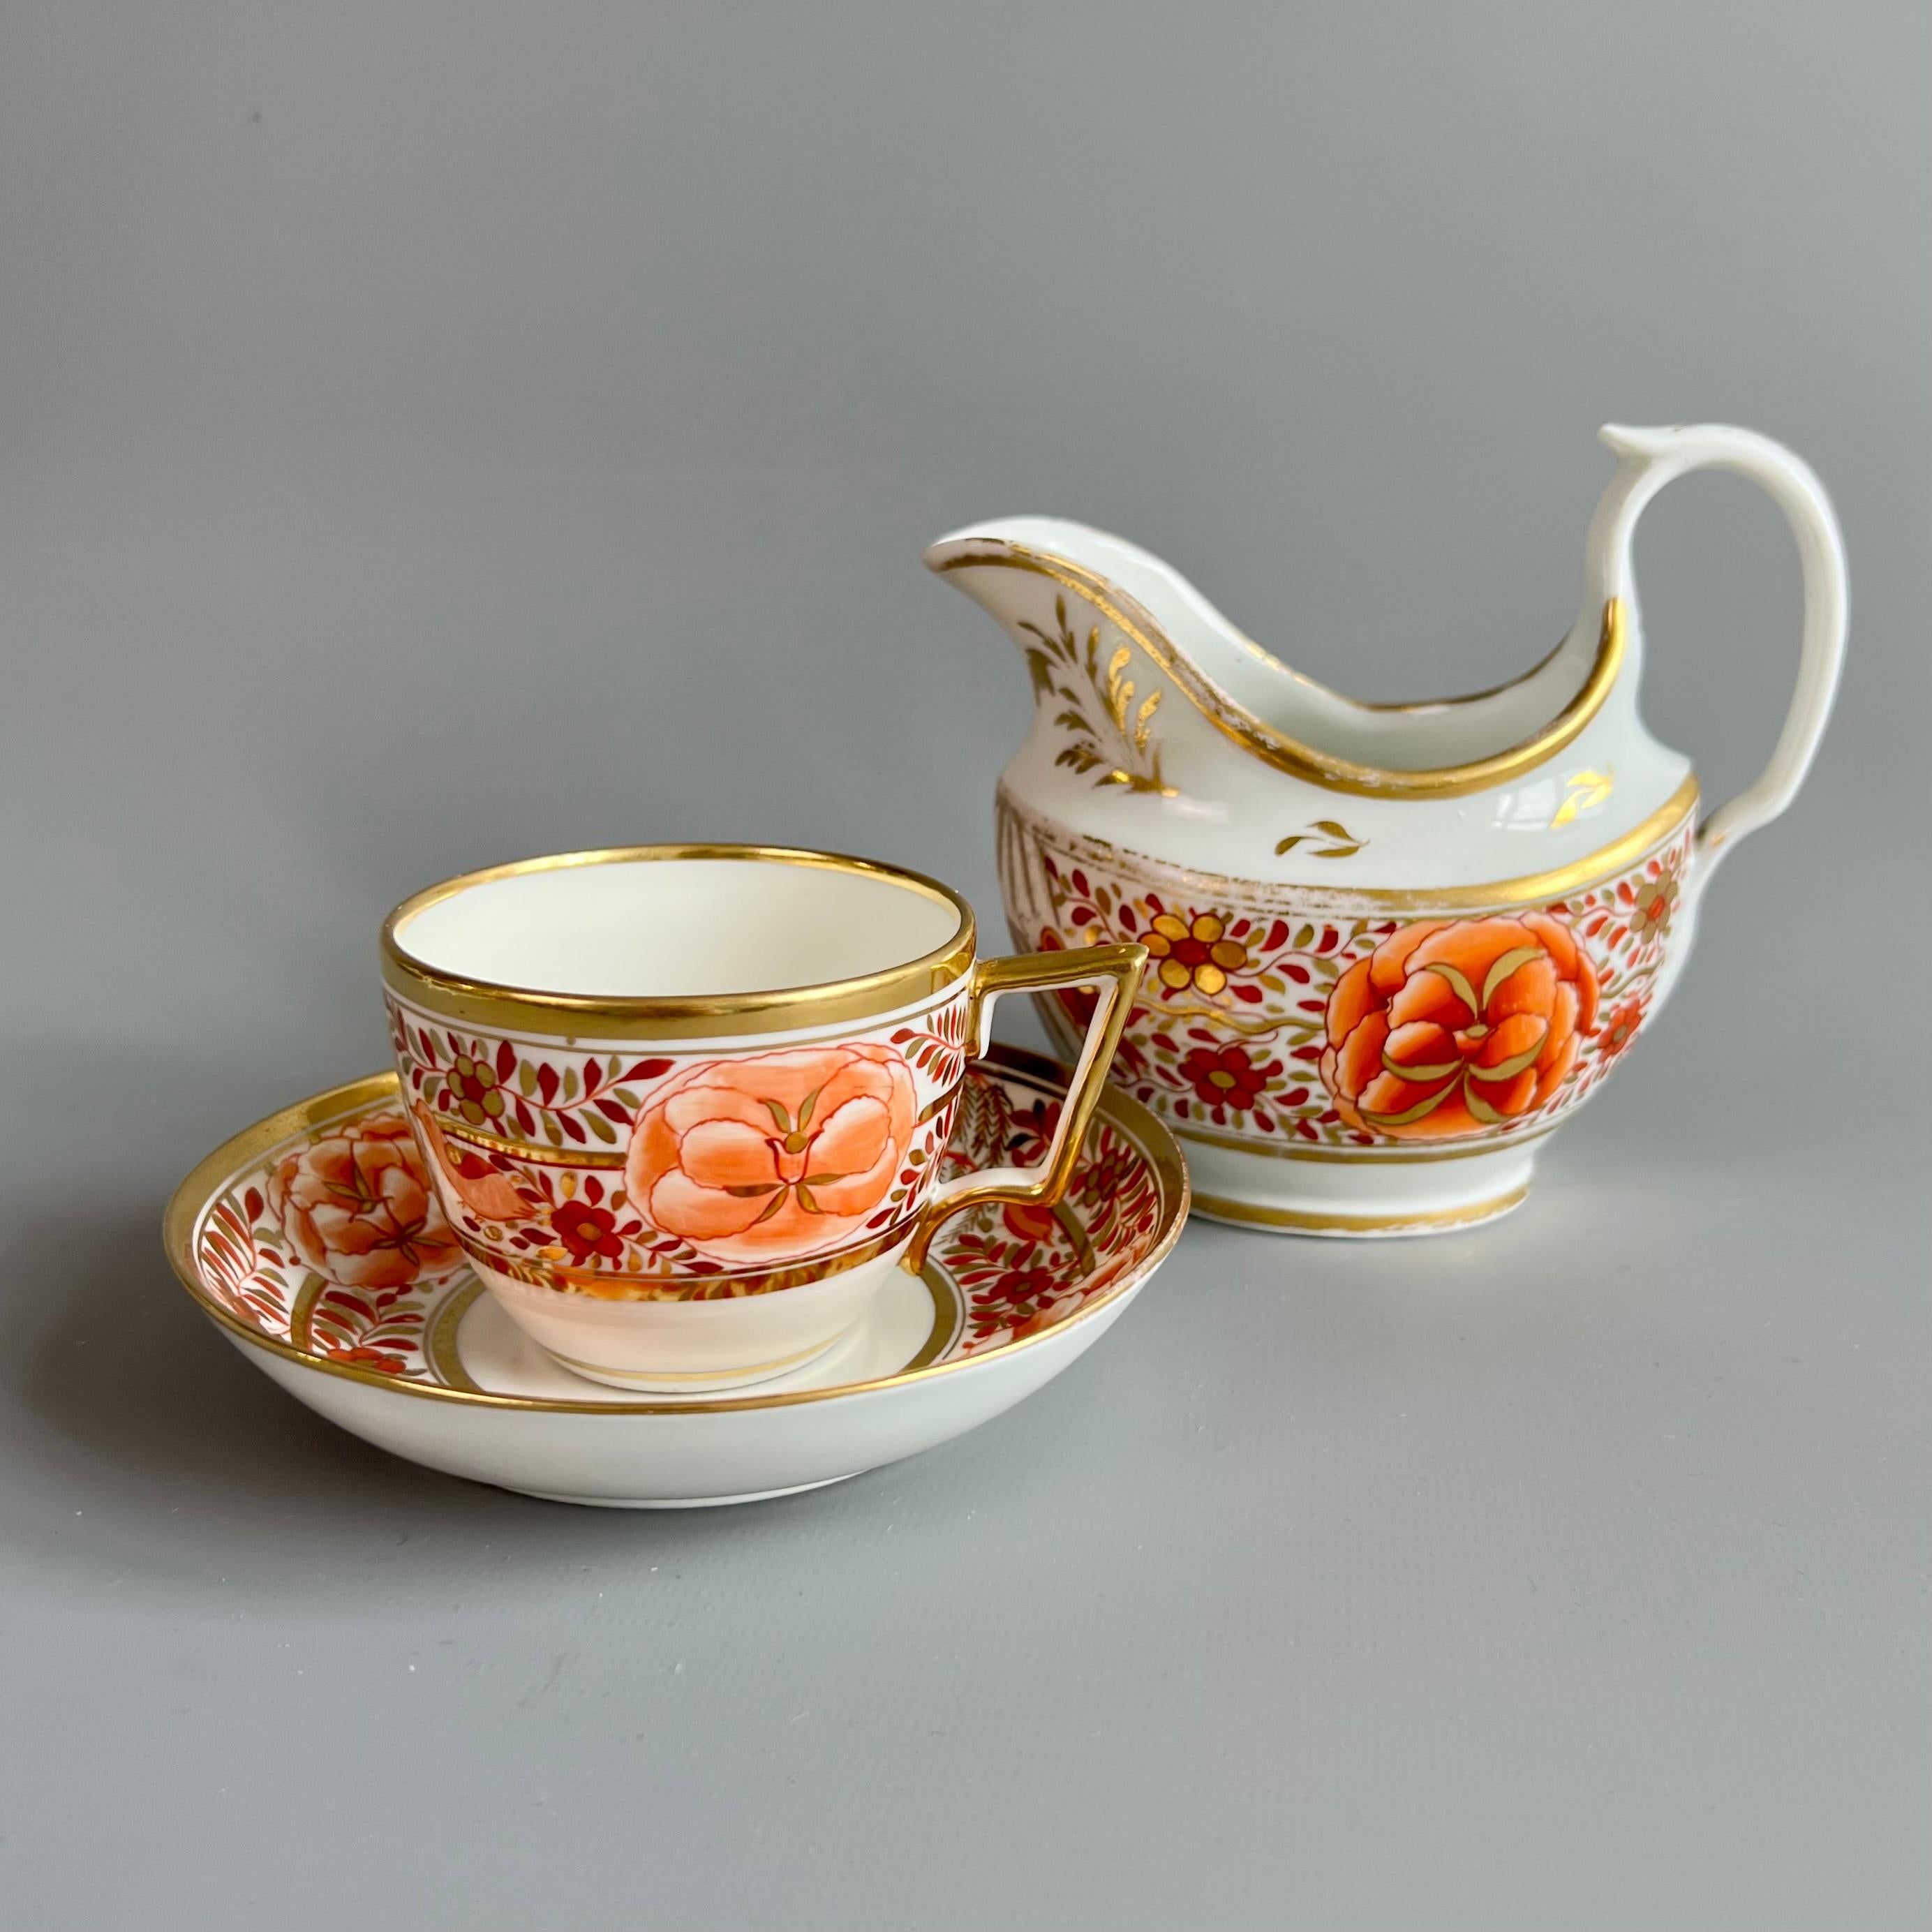 This is a very charming teacup and saucer made by Thomas Rose at Coalport around the year 1805, which was the Georgian era. The set is decorated with a beautiful pattern of red and orange peonies, a gilt weeping willow and birds.

We also have a